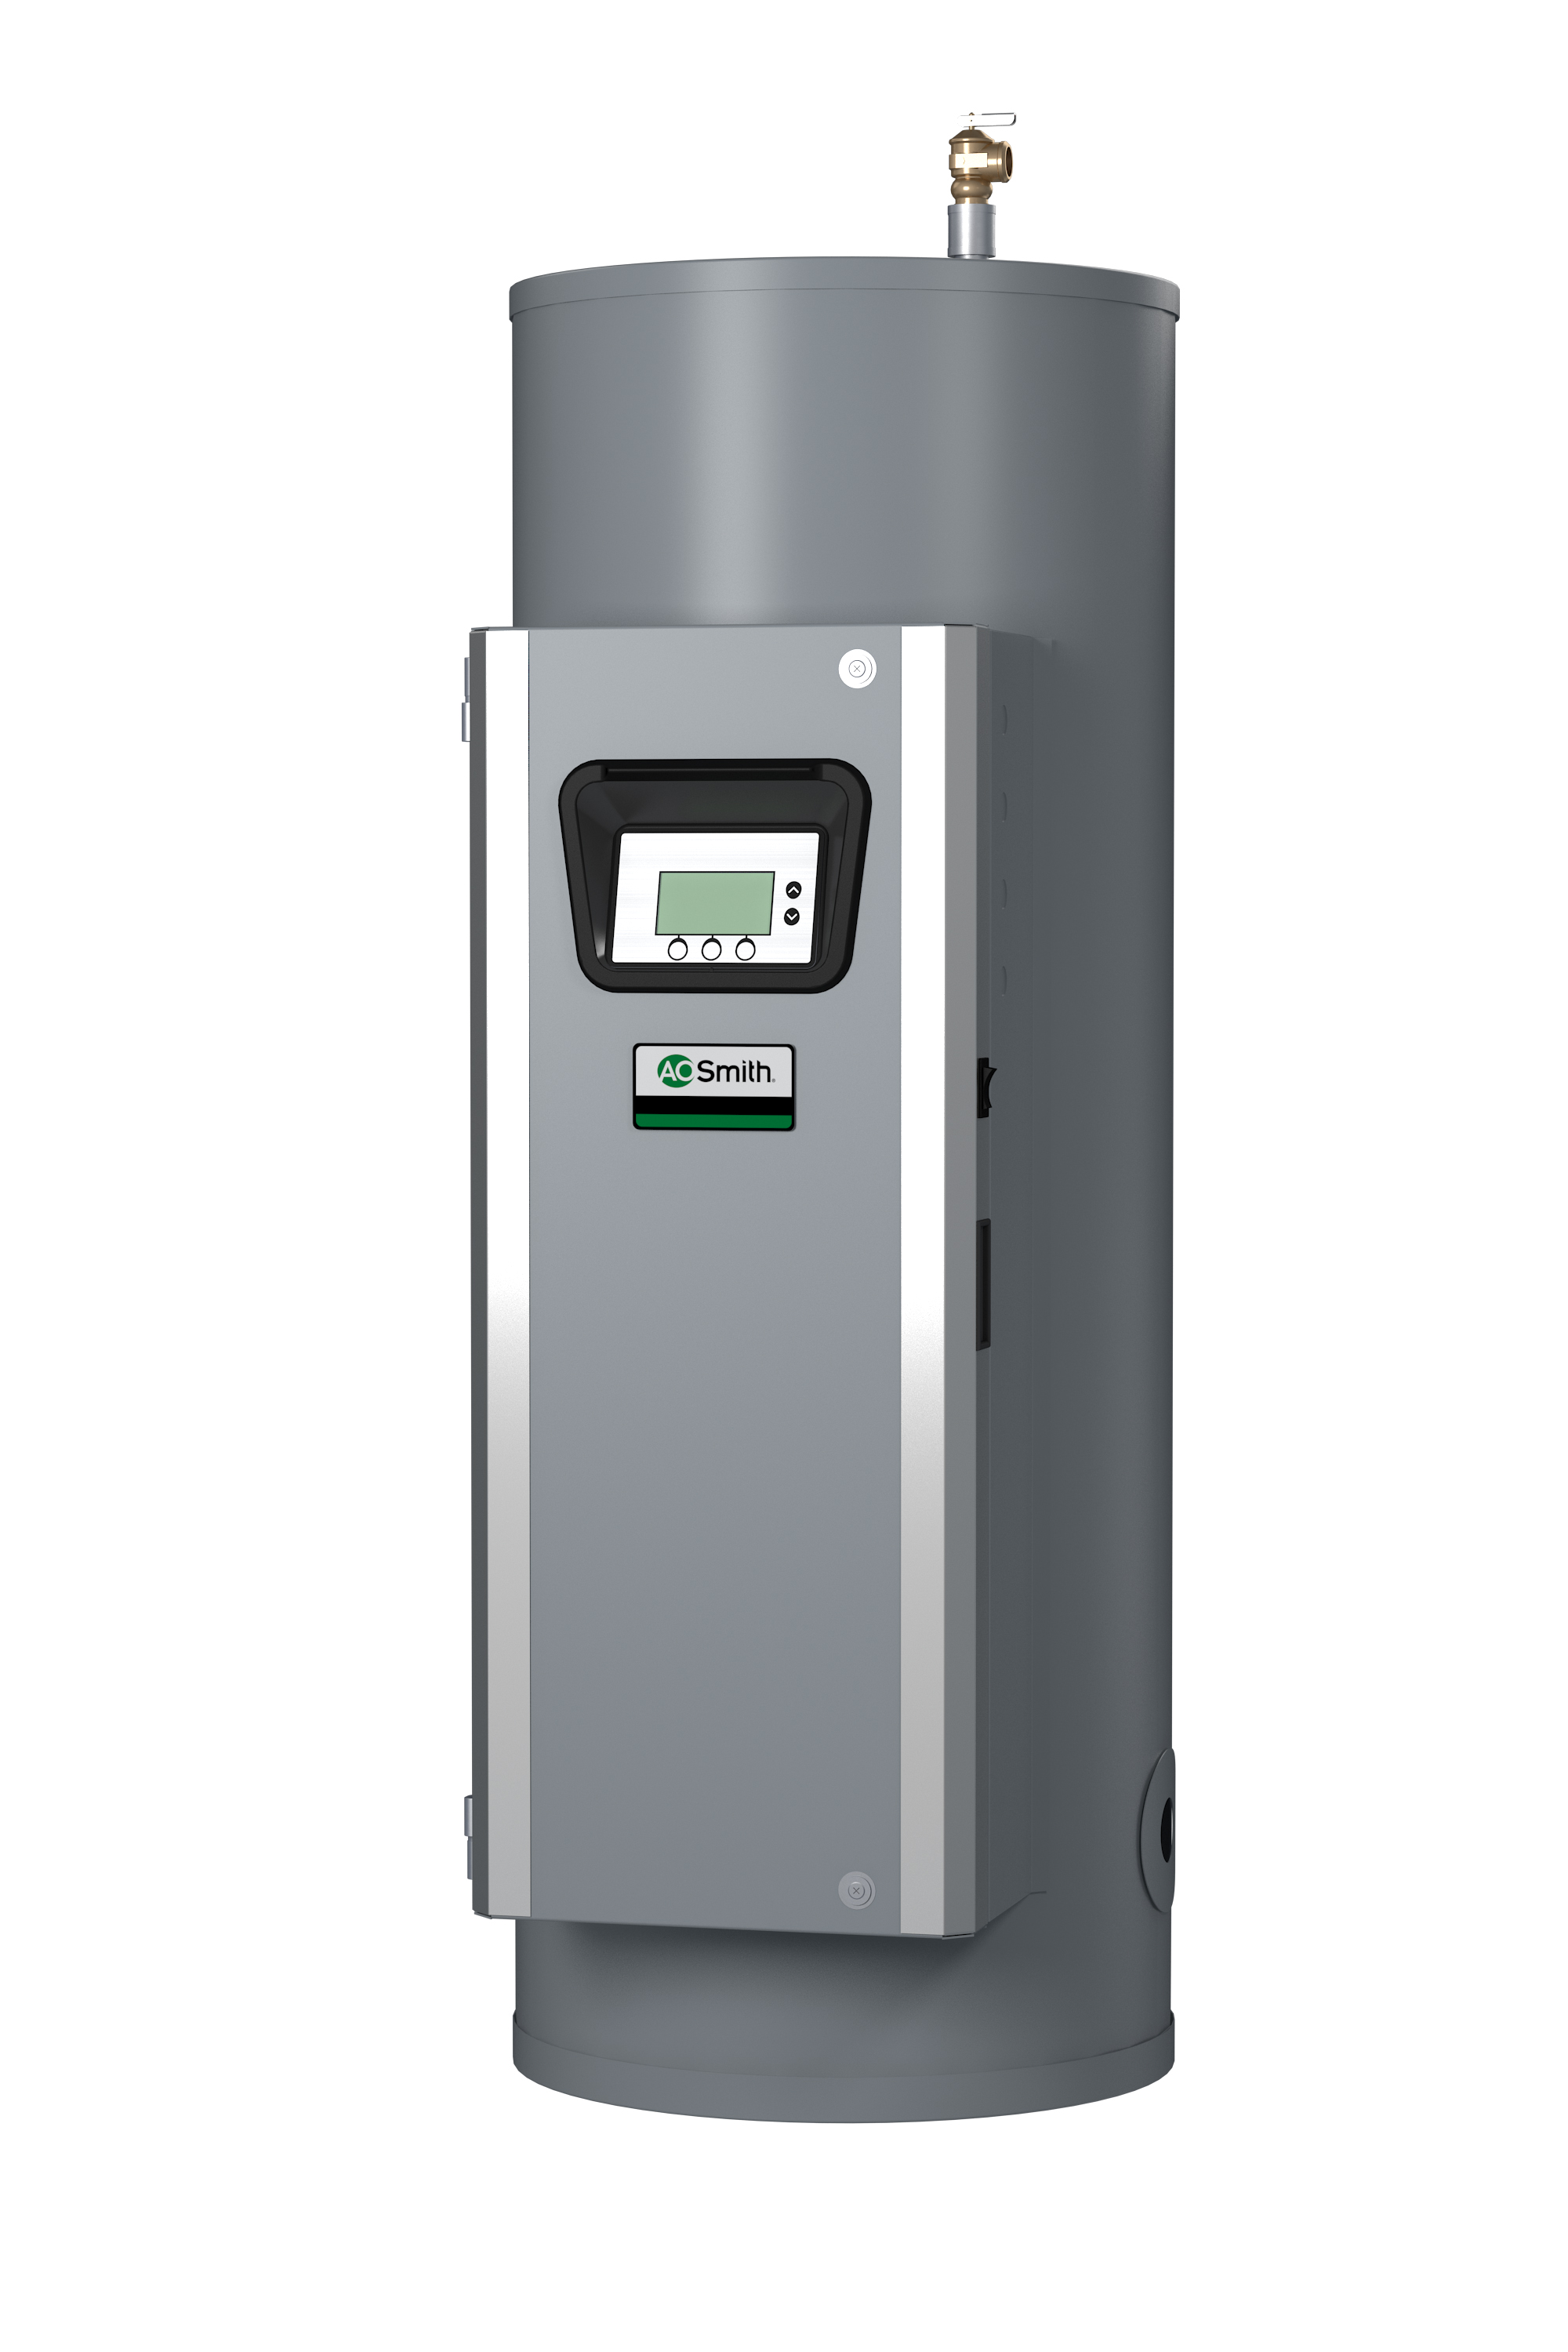 AO SMITH DSE-65A-12, 65 GALLONS, 12.3KW, 480 VOLT, 25 AMPS, 1 PHASE, 1 ELEMENT, ASME CUSTOM Xi SERIES HEAVY DUTY COMMERCIAL ELECTRIC WATER HEATER